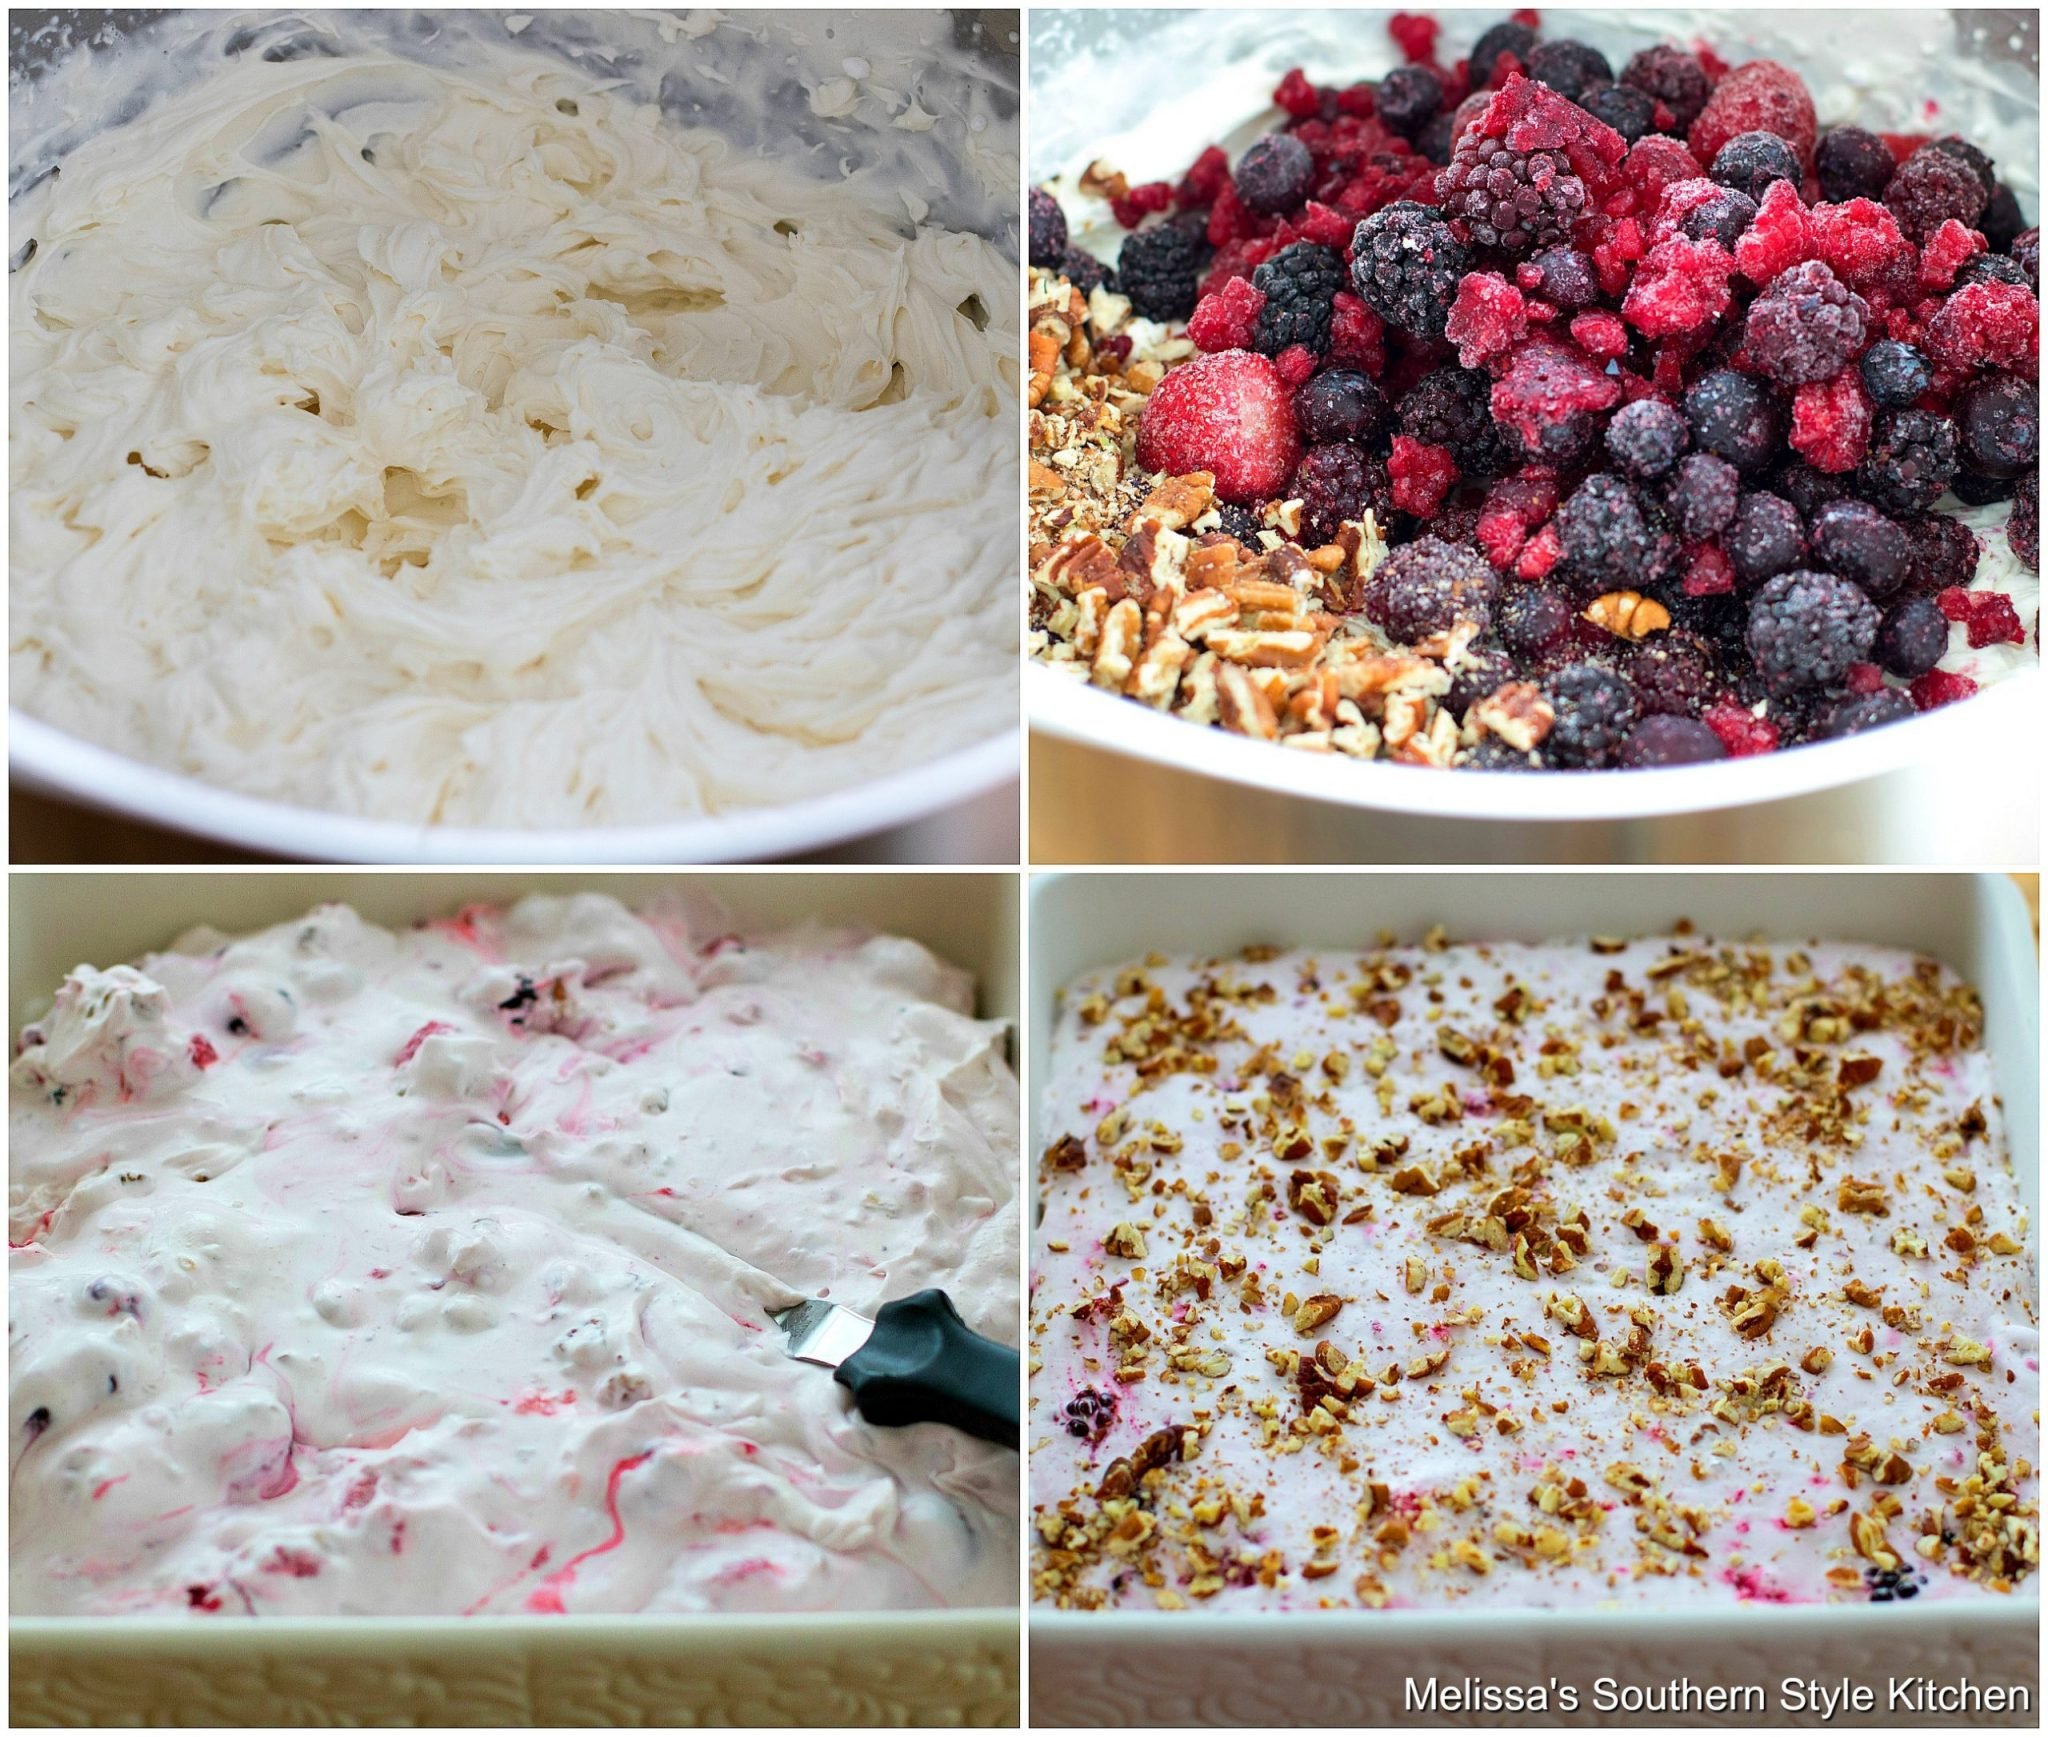 Step-by-step preparation images and ingredients for frozen fruit salad